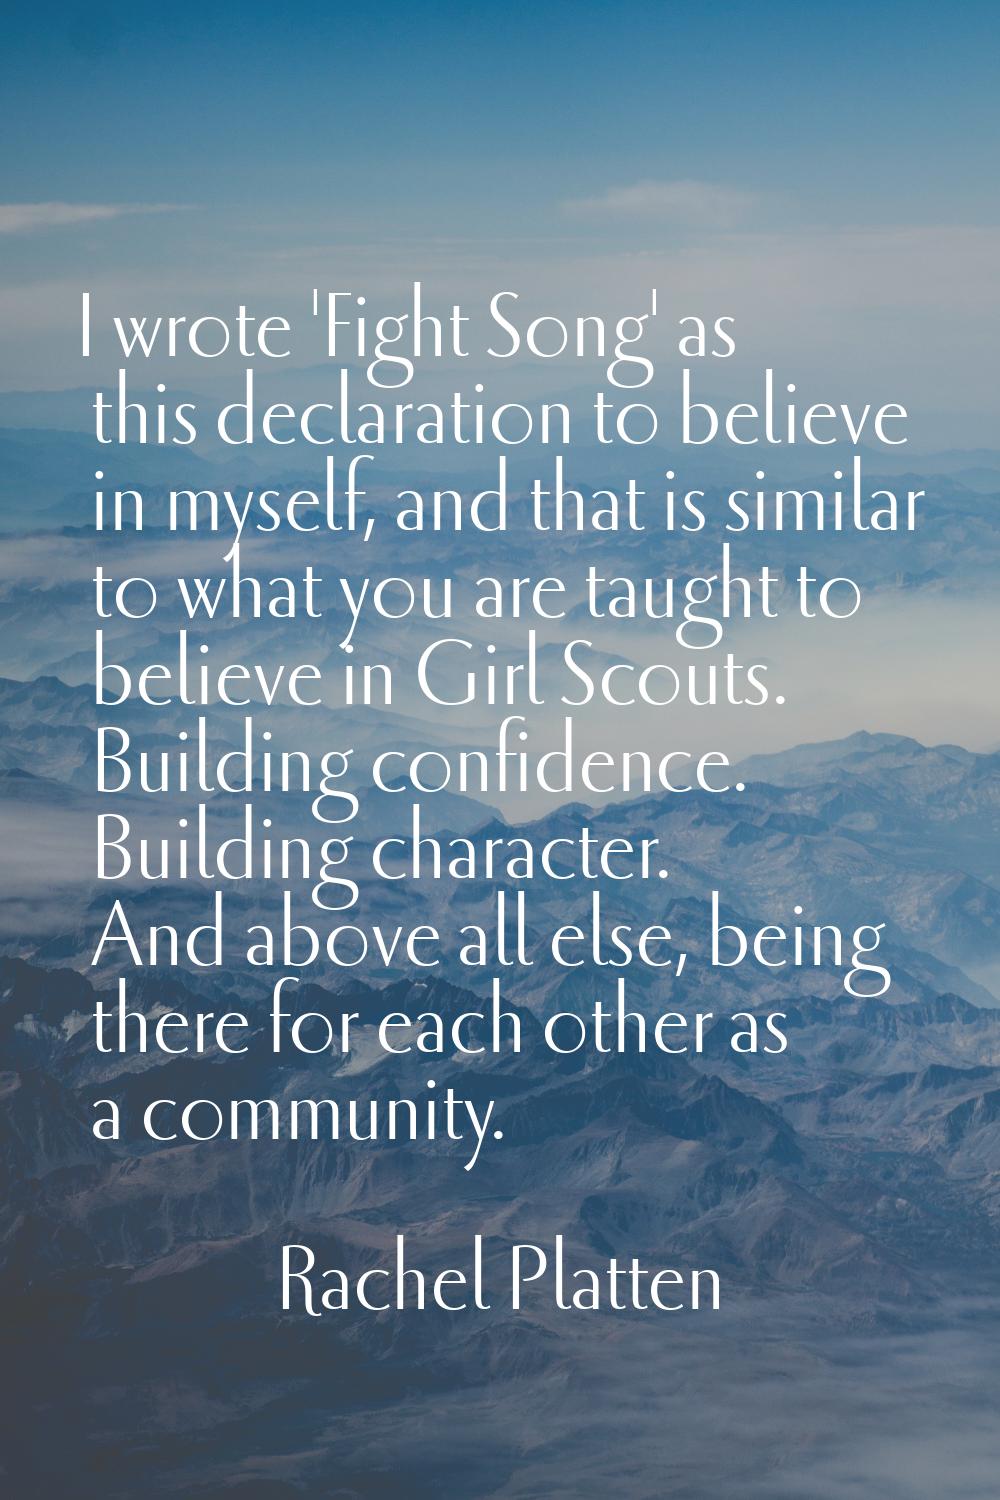 I wrote 'Fight Song' as this declaration to believe in myself, and that is similar to what you are 